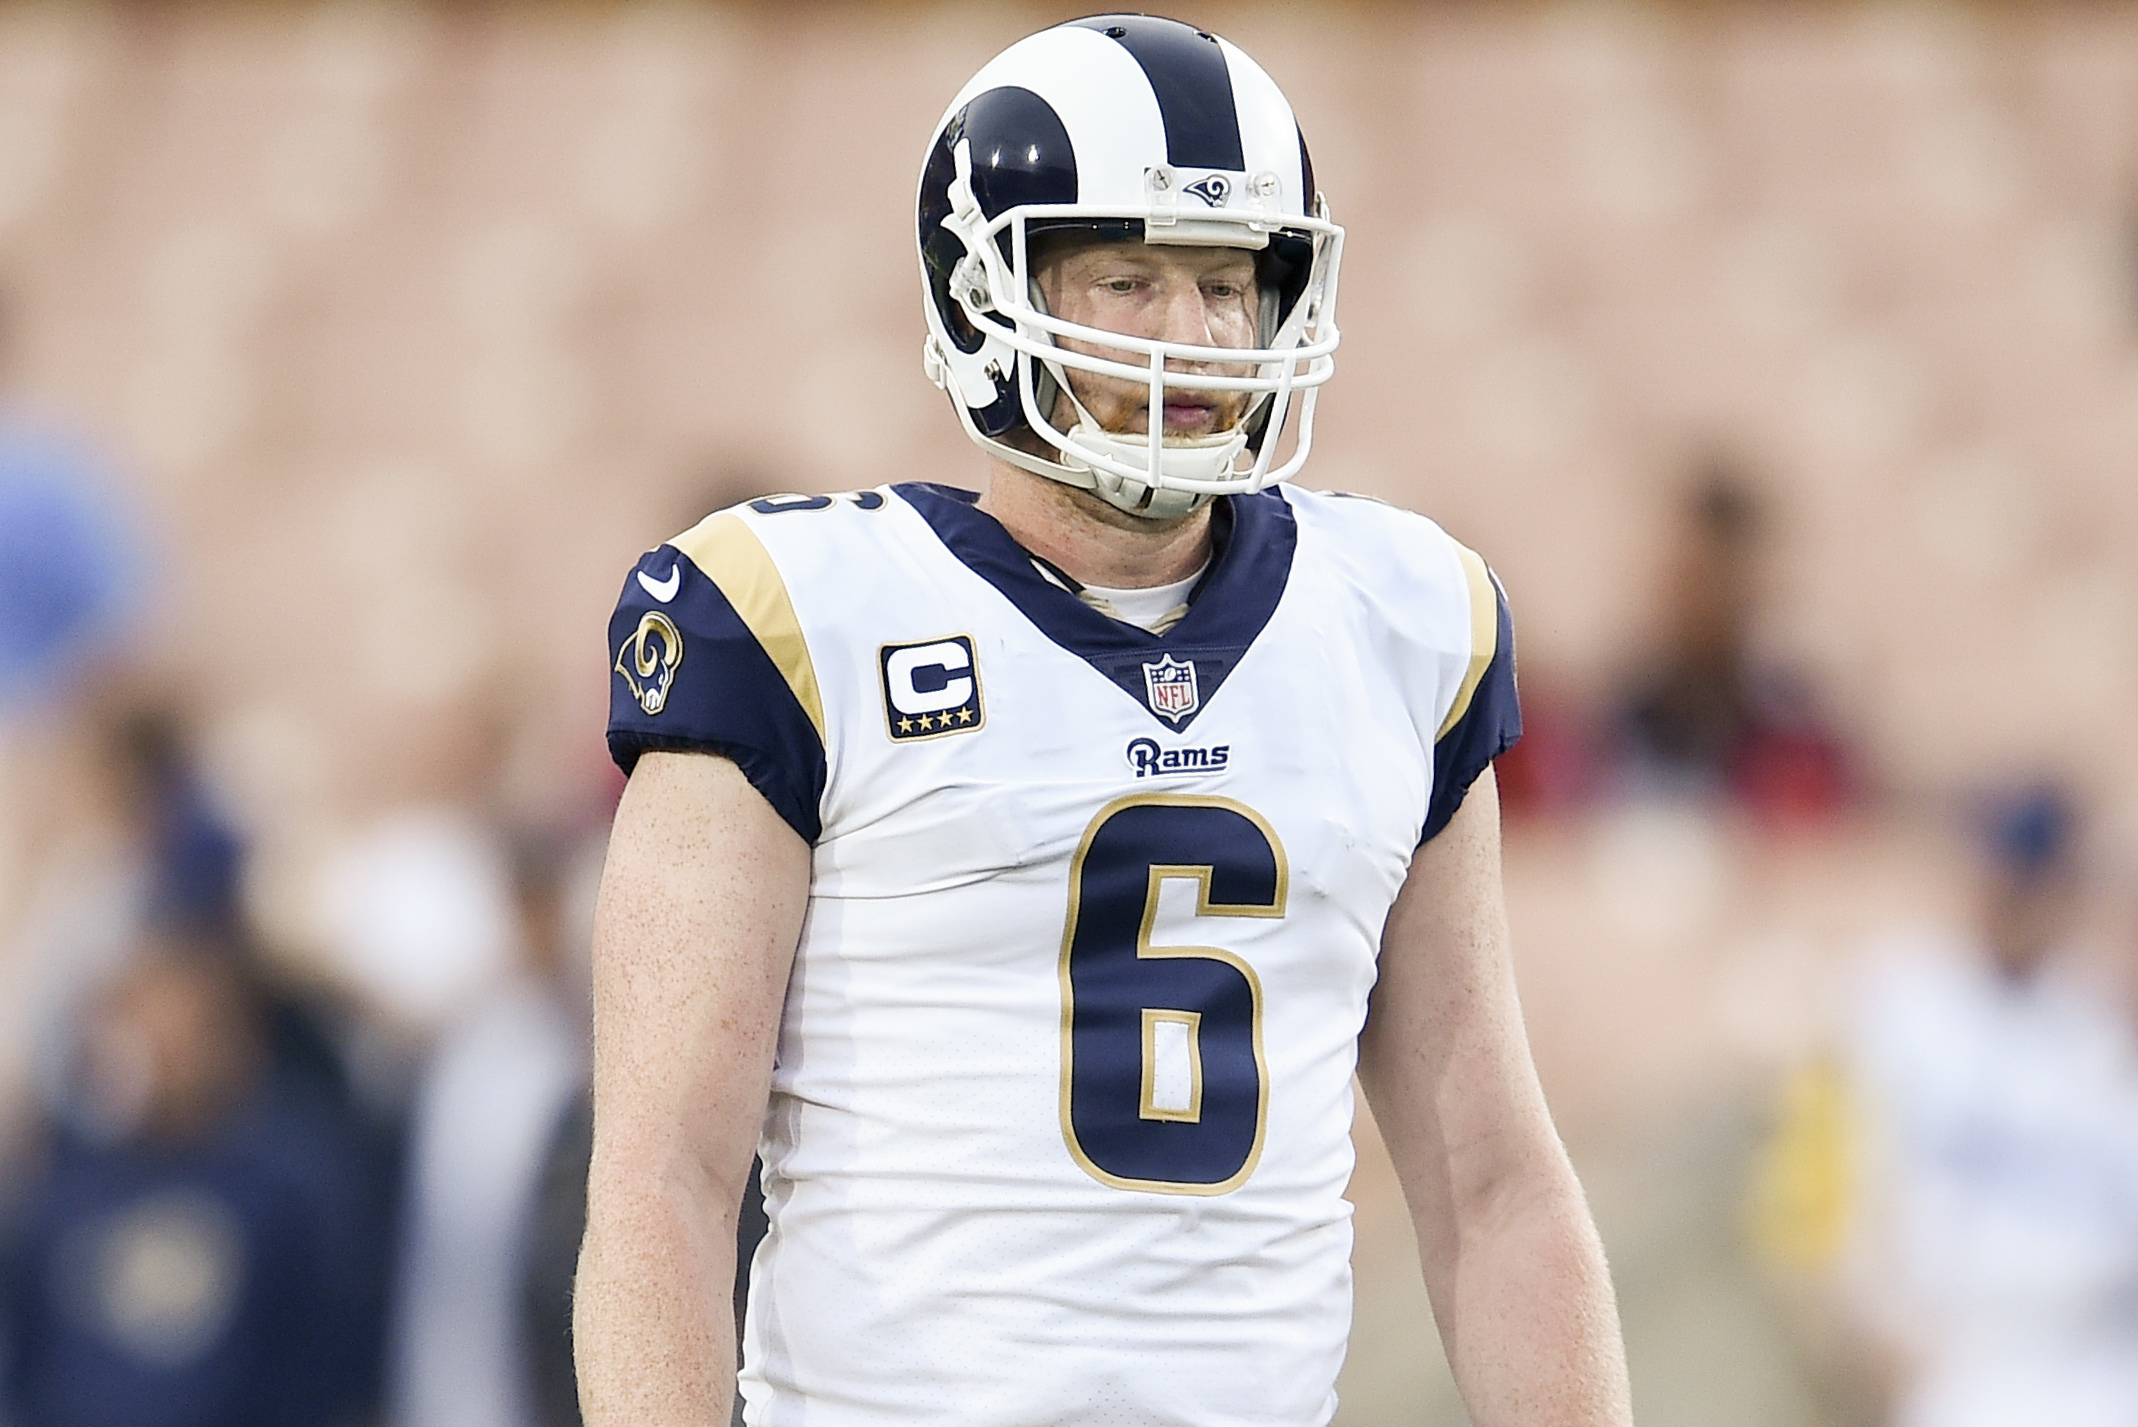 I know Johnny Hekker hinted that all yellow uniforms were doubtful